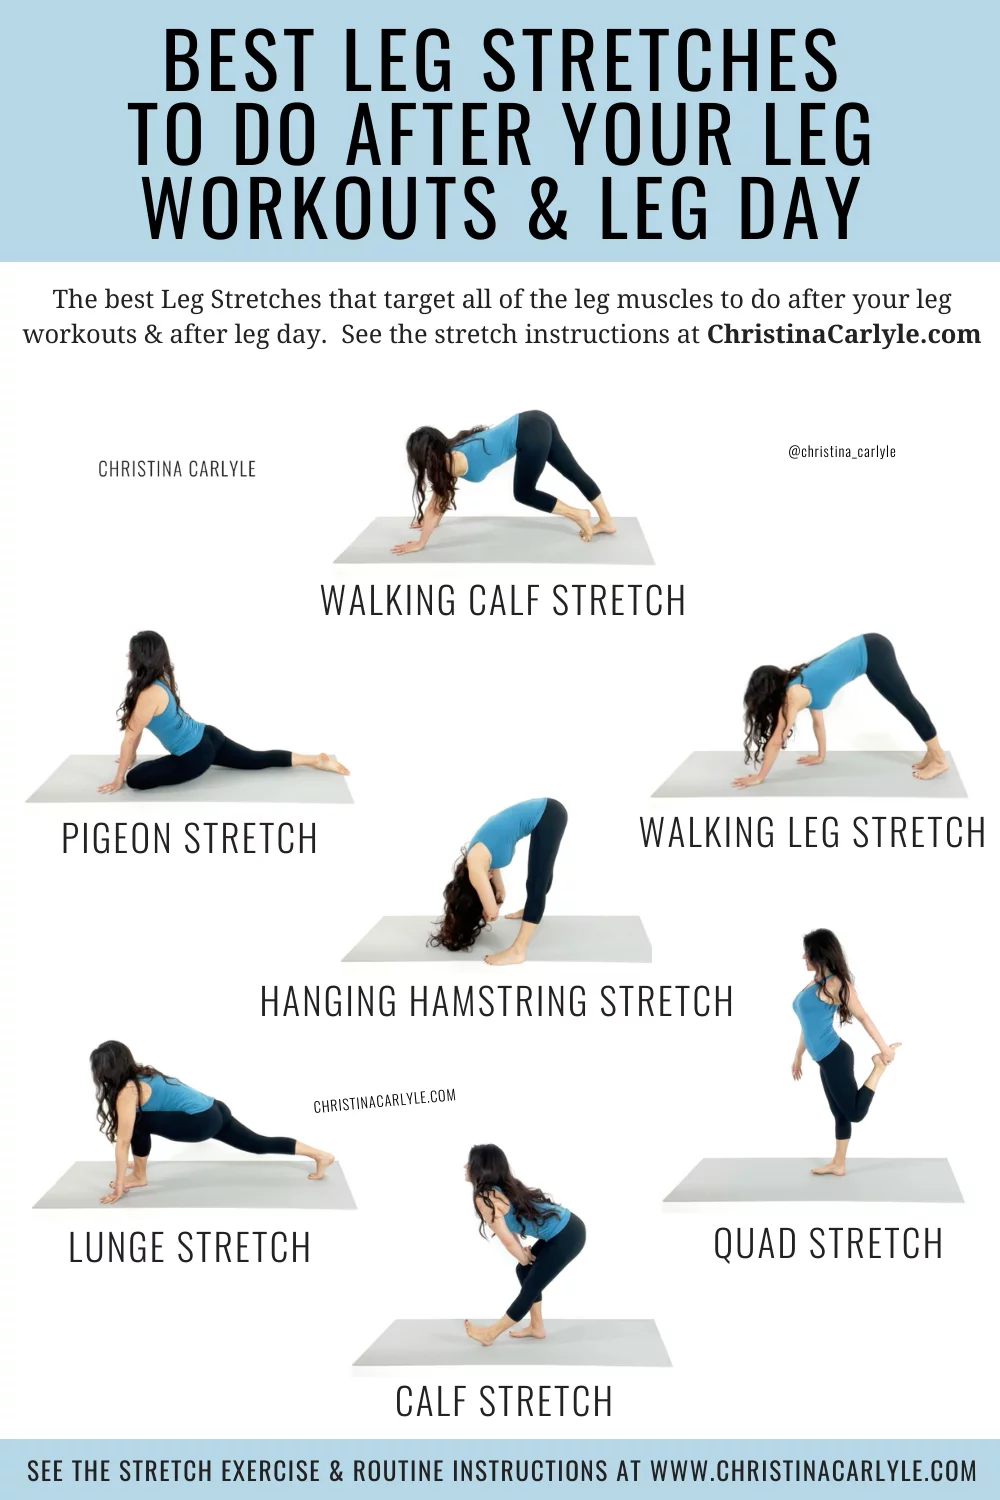 Post-workout stretching routines